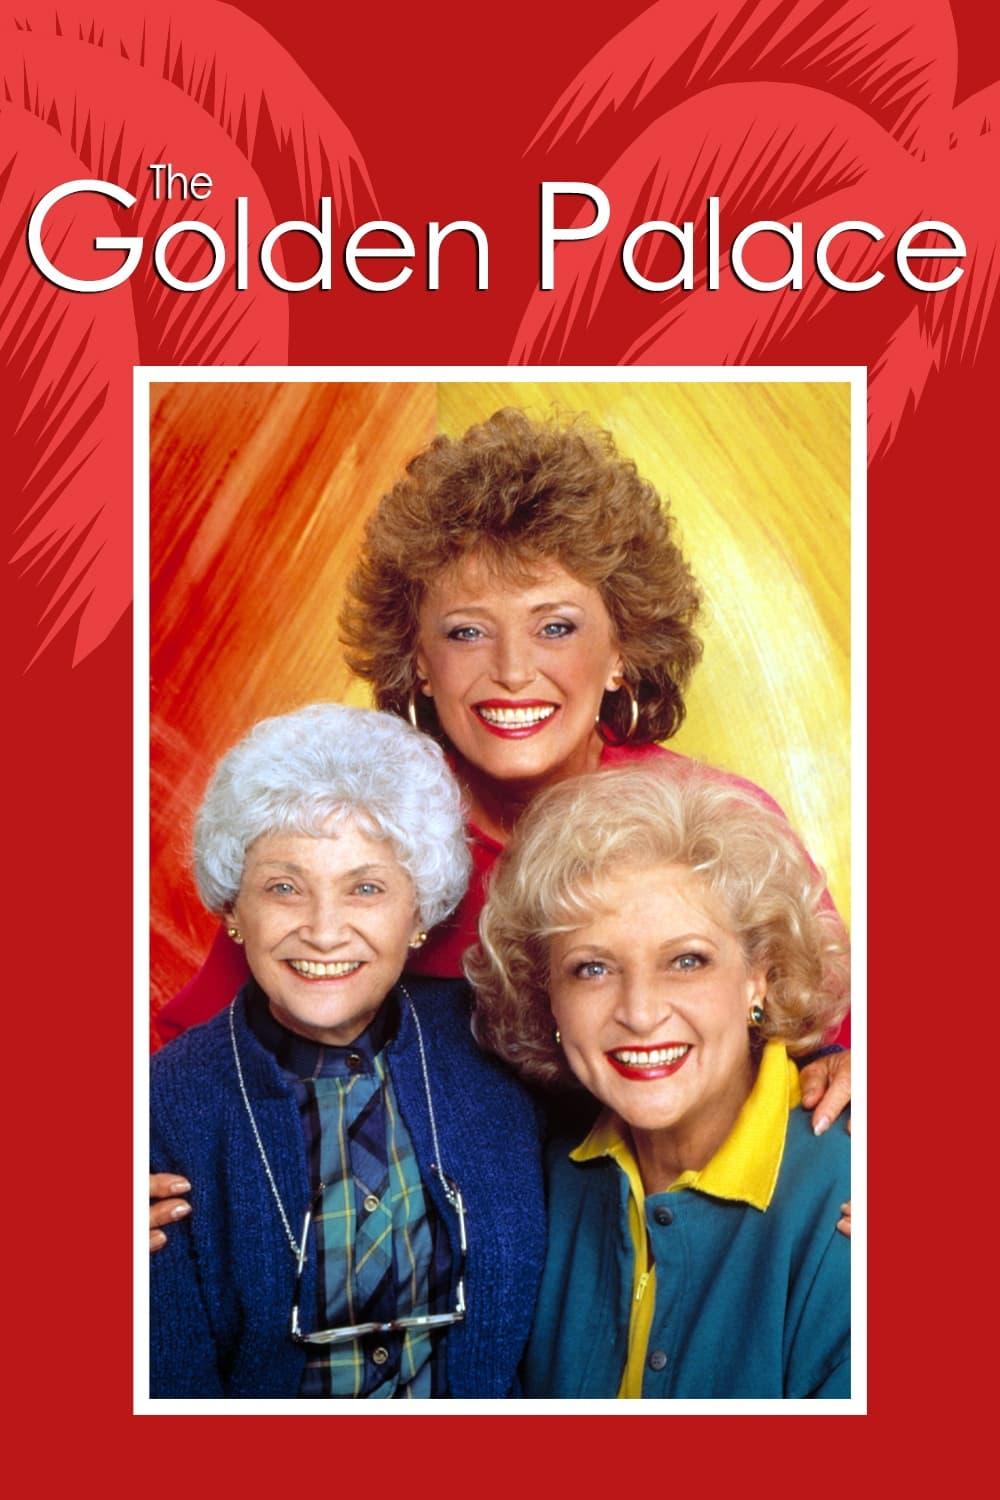 The Golden Palace poster